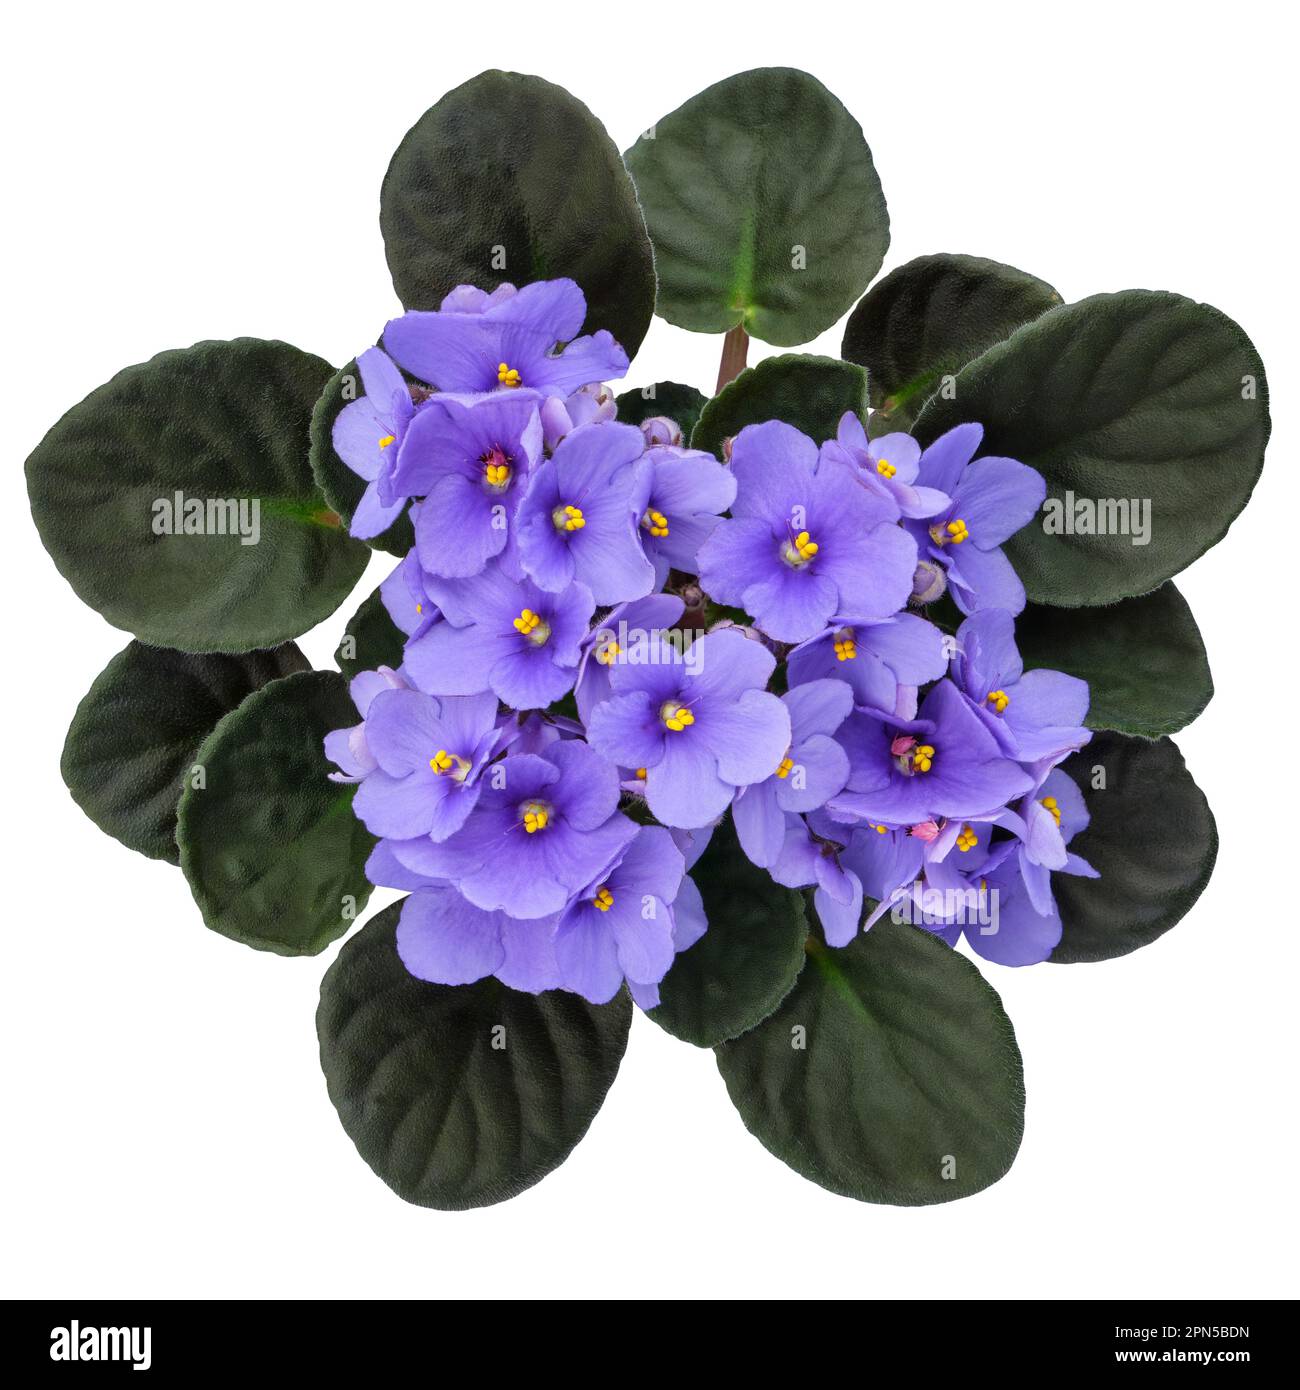 Blue Violet Saintpaulia flower isolated on white background. African Saintpaulia houseplant. Top view. Stock Photo